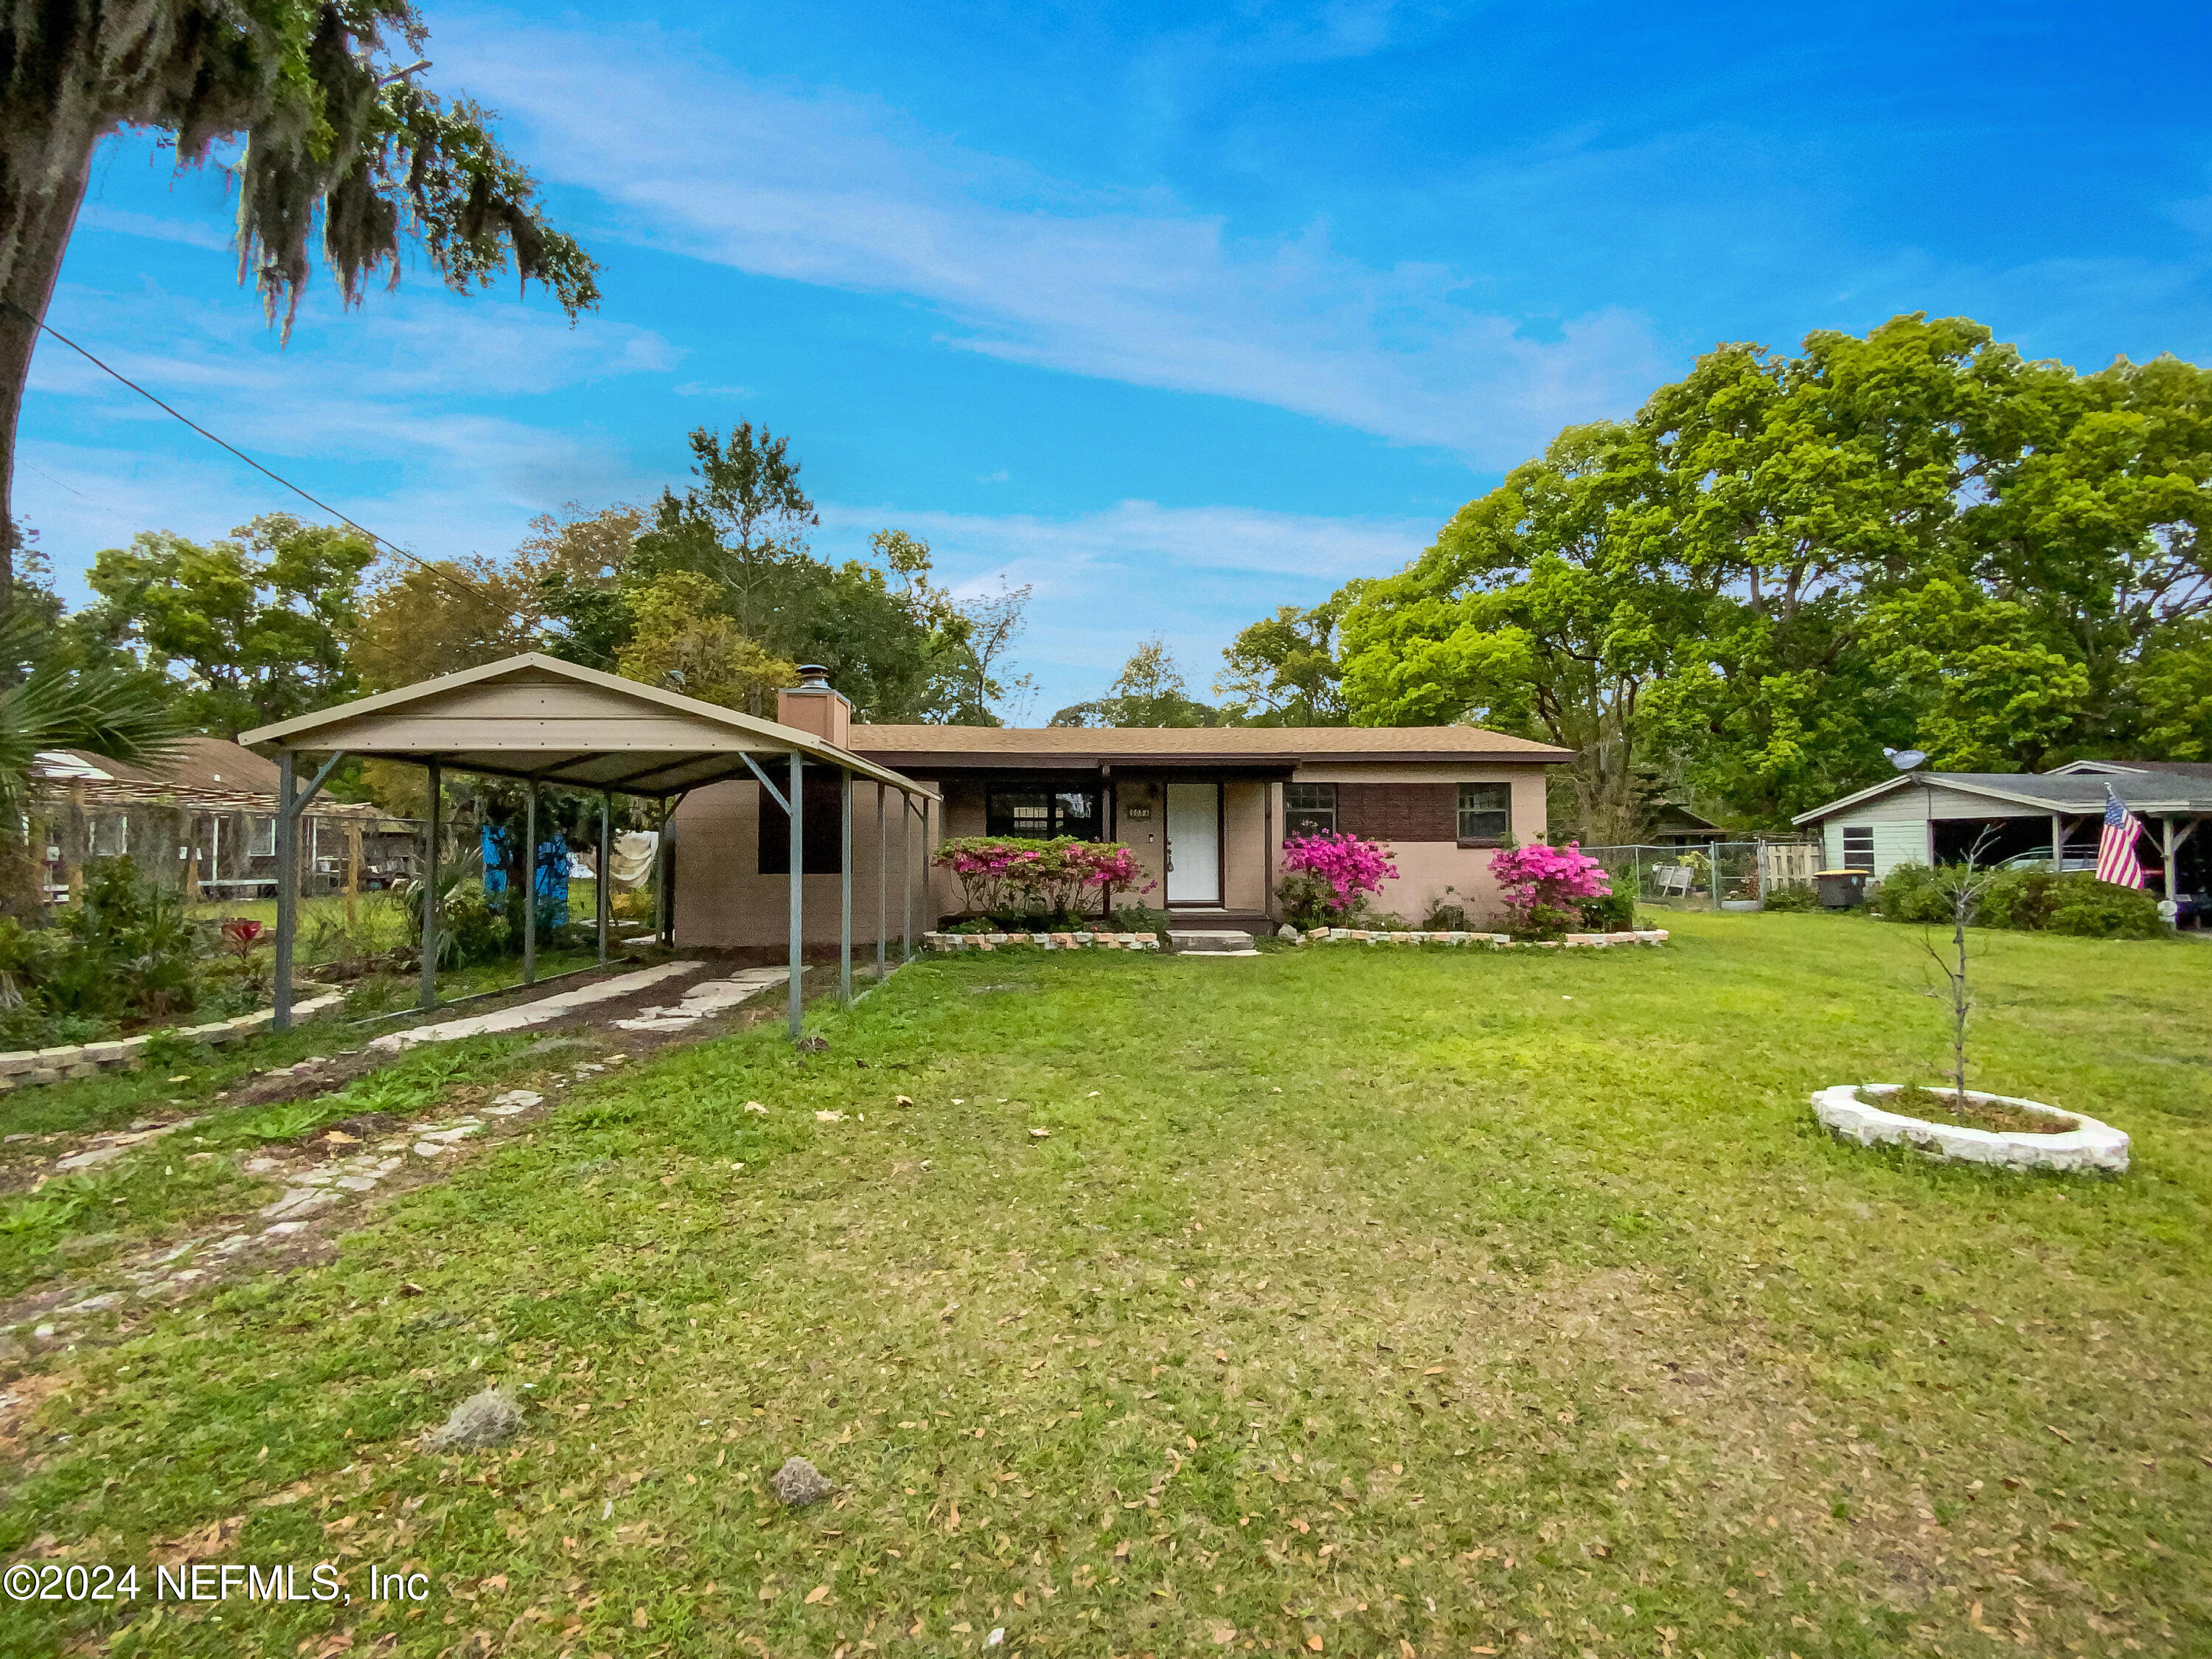 Jacksonville, FL home for sale located at 5034 Catoma Street, Jacksonville, FL 32210